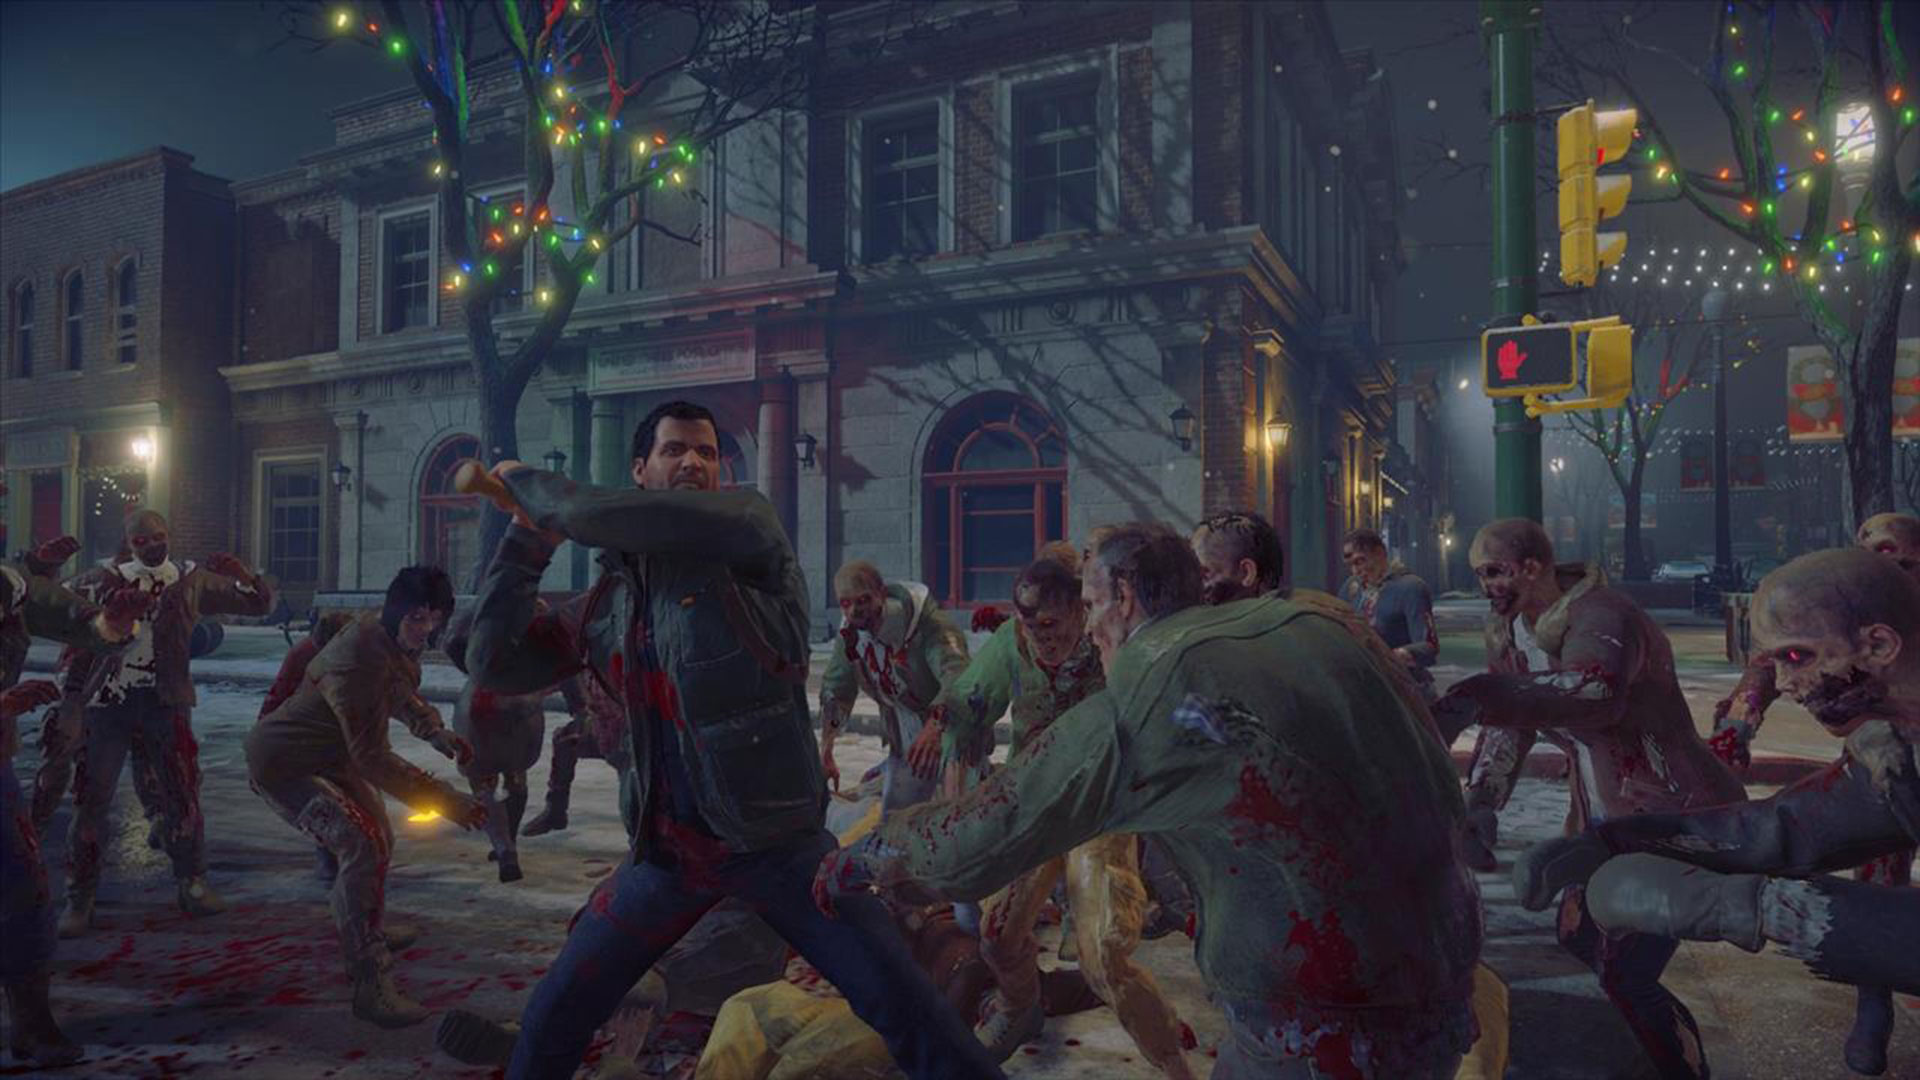 Dead Rising Wallpapers